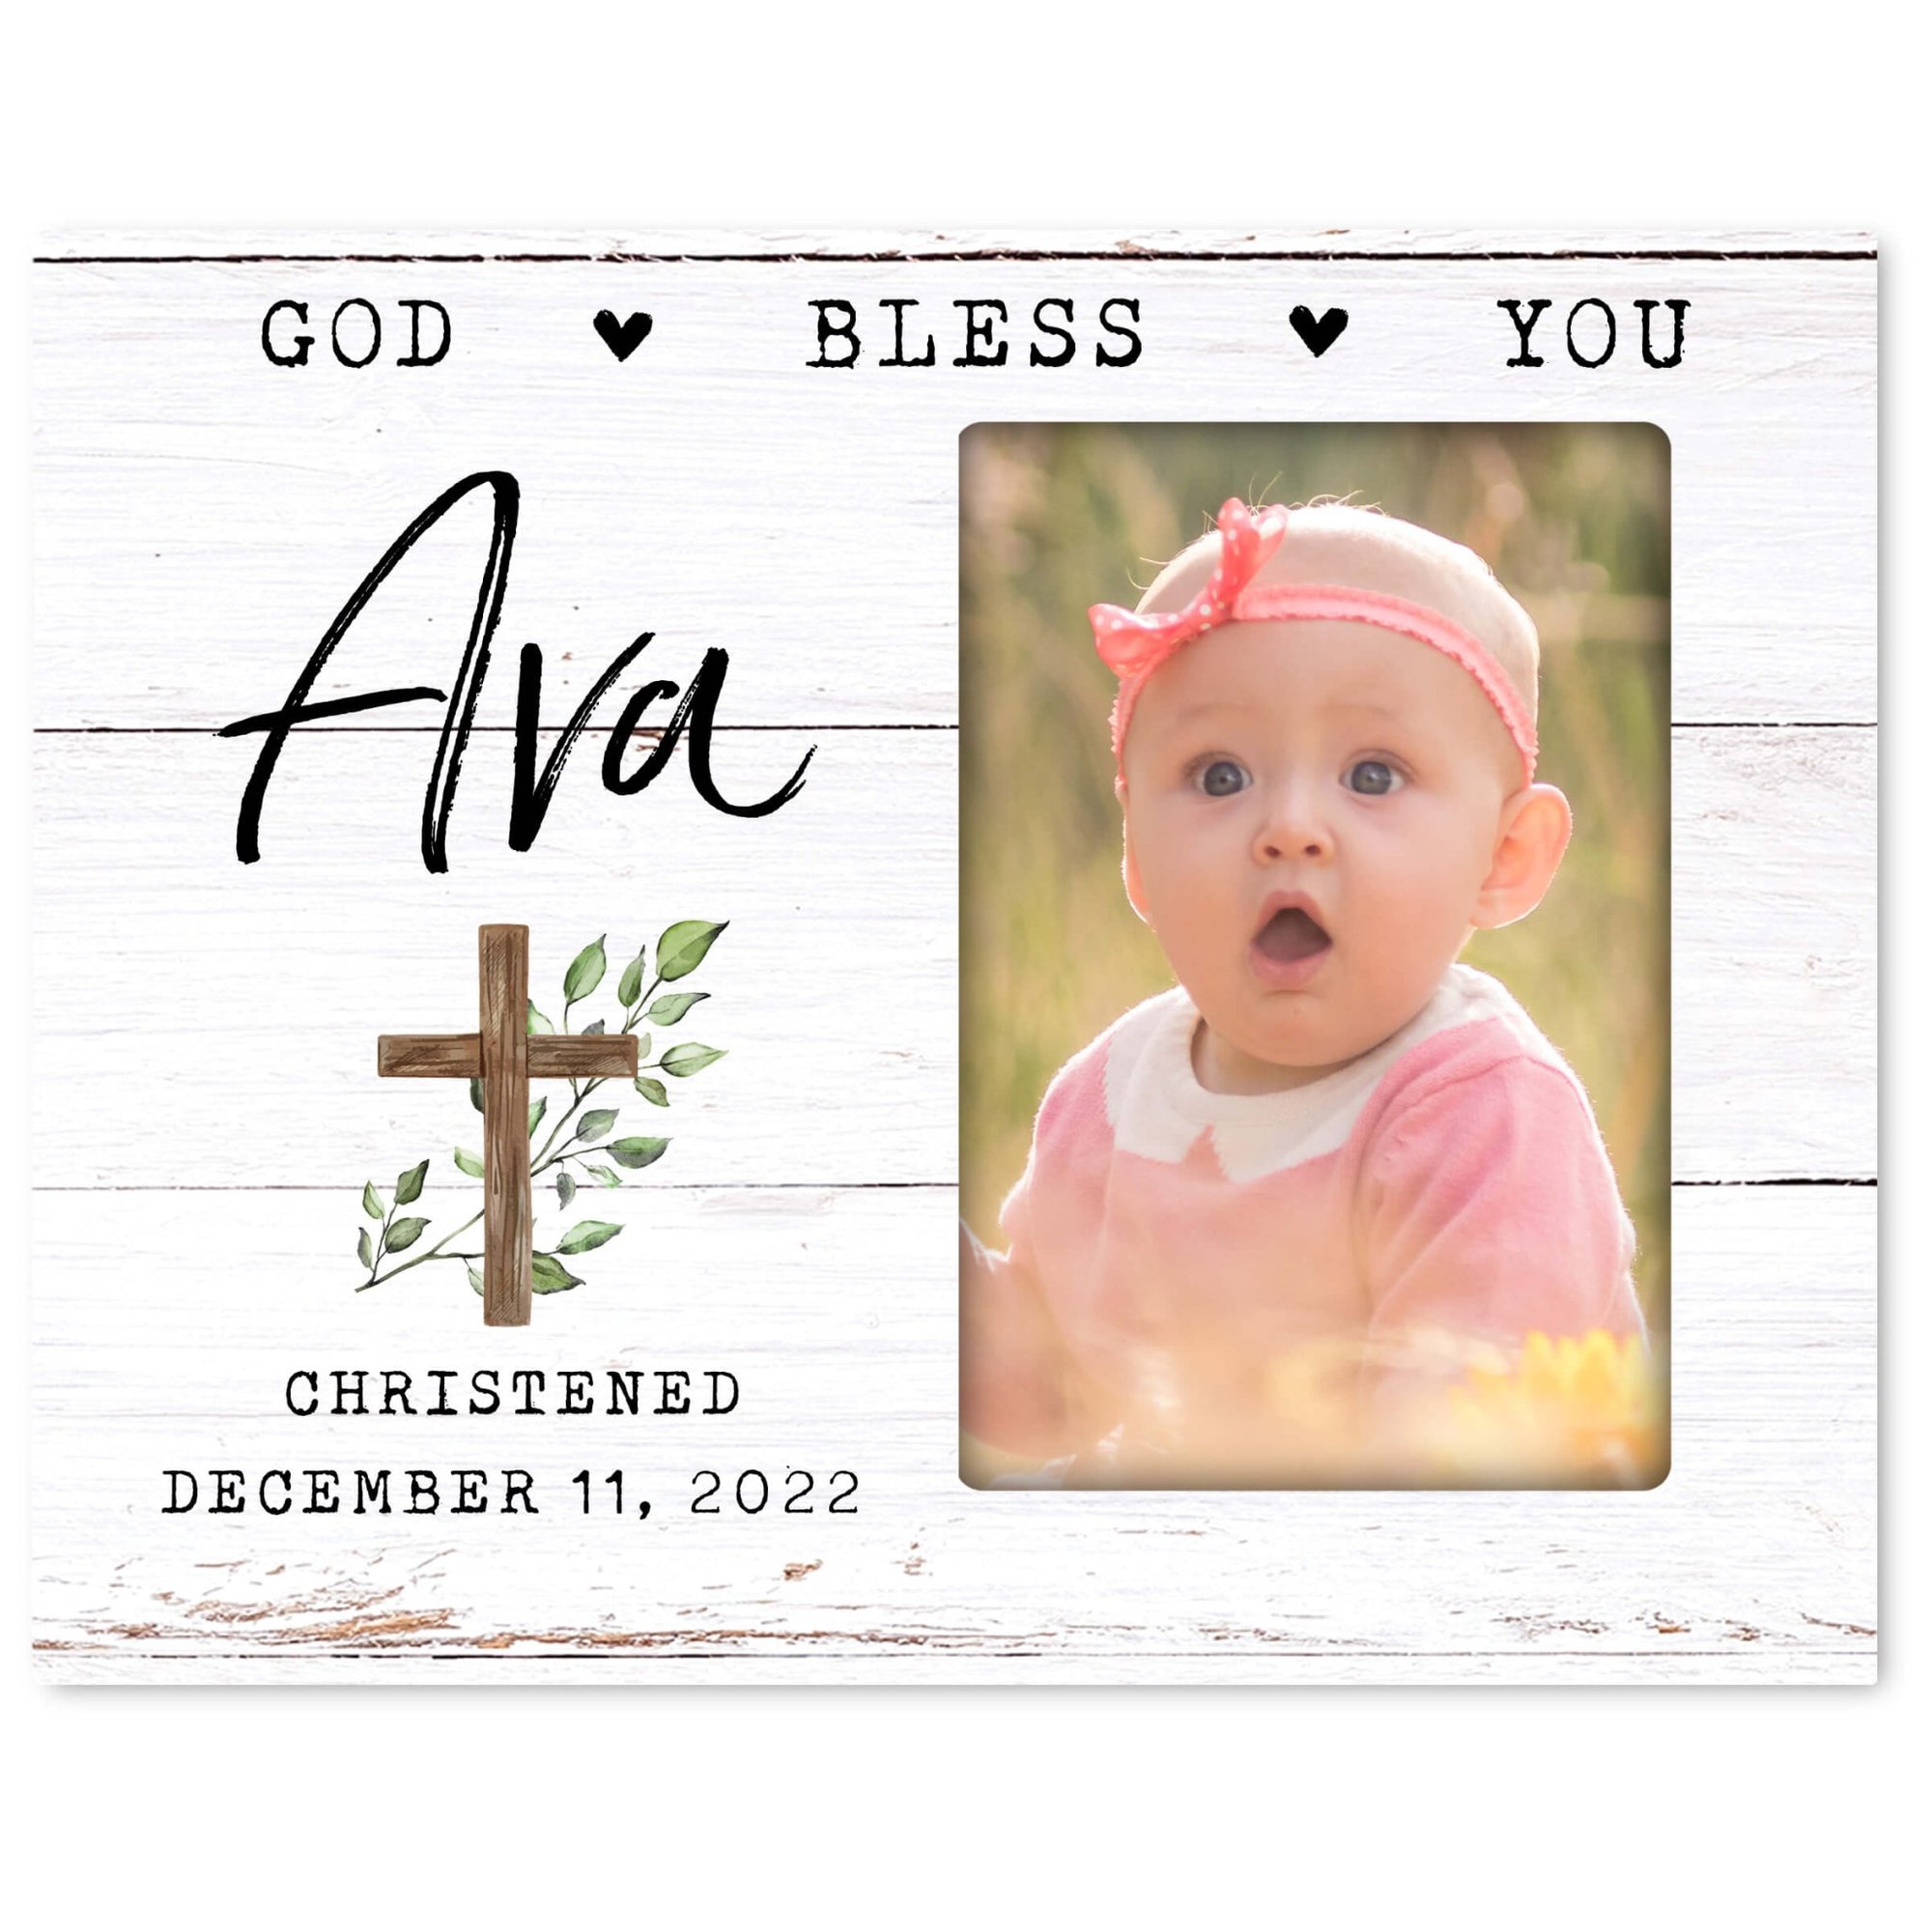 Personalized Christening Photo Frame - Be Strong - LifeSong Milestones